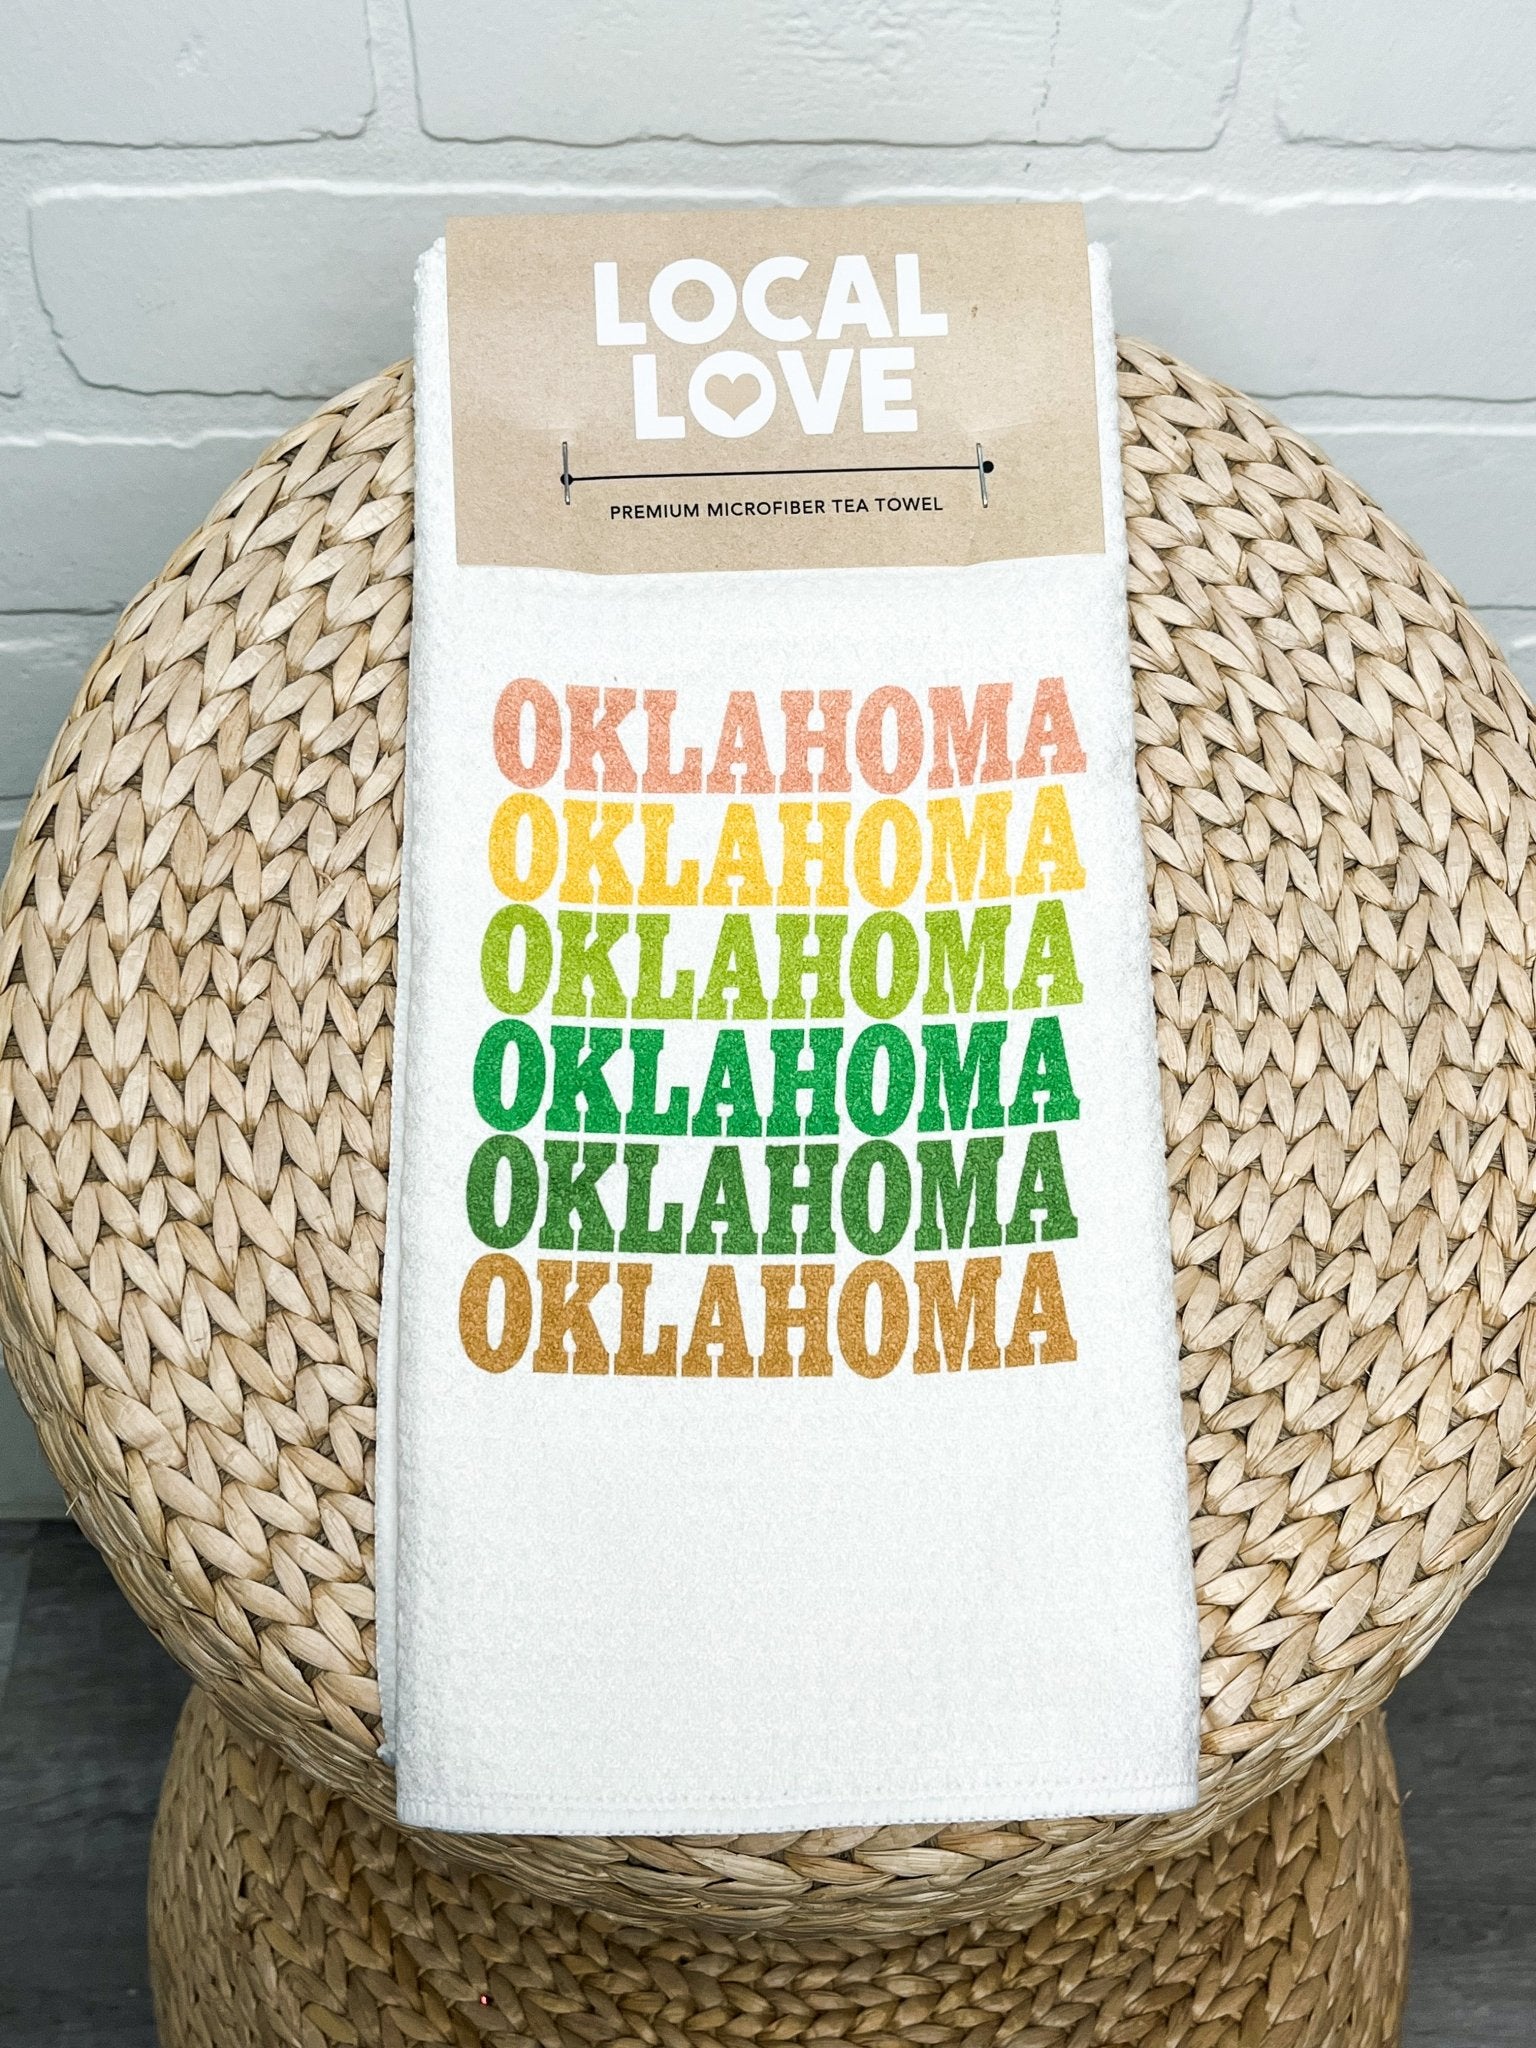 Oklahoma repeater tea towel - Trendy Gifts at Lush Fashion Lounge Boutique in Oklahoma City